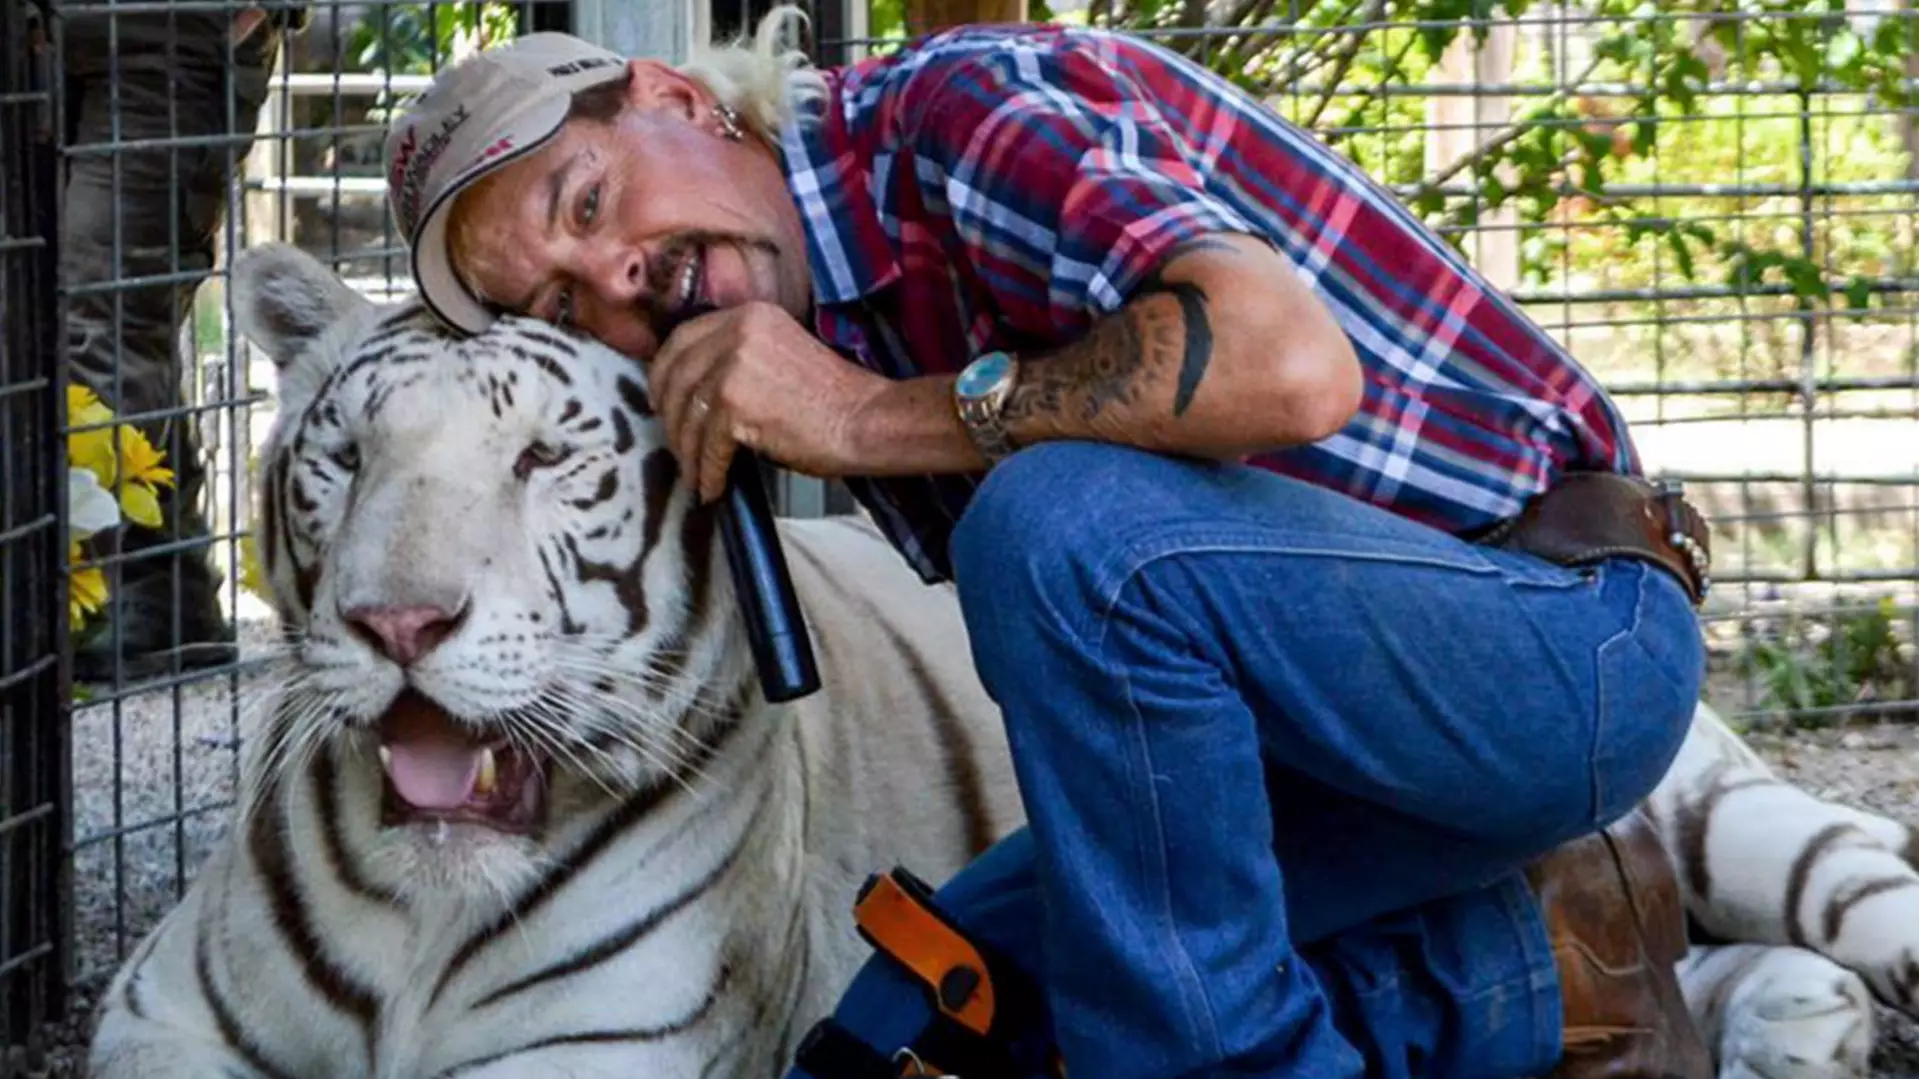 Joe Exotic became an international name after the Netflix documentary (